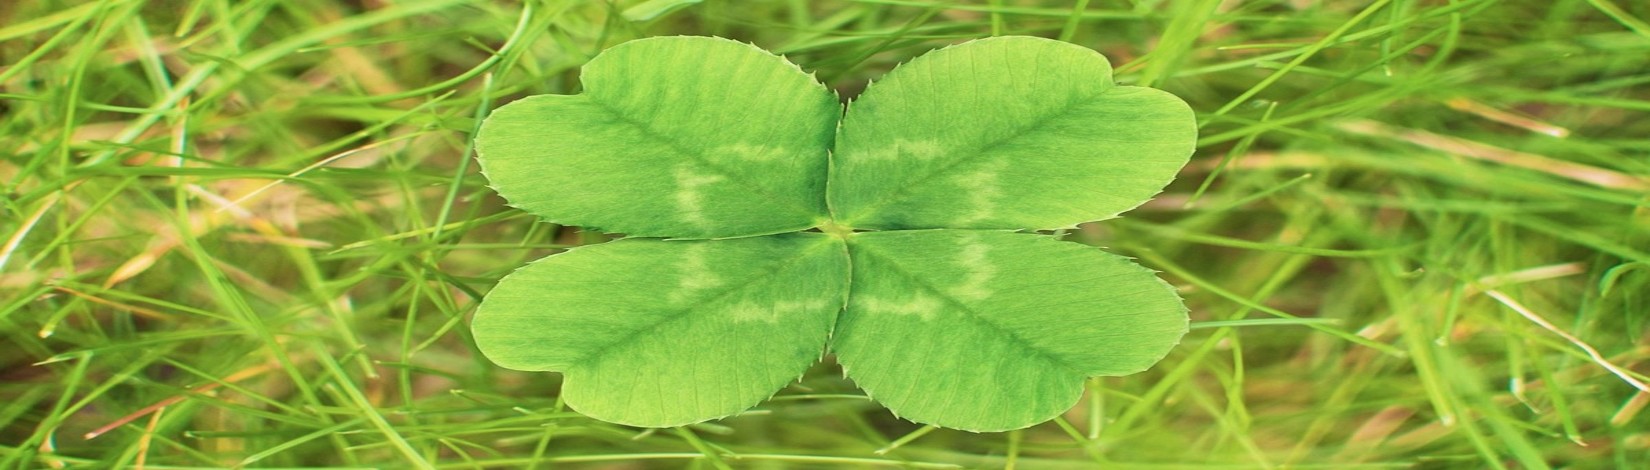 four leaf clover laying on a bed of grass